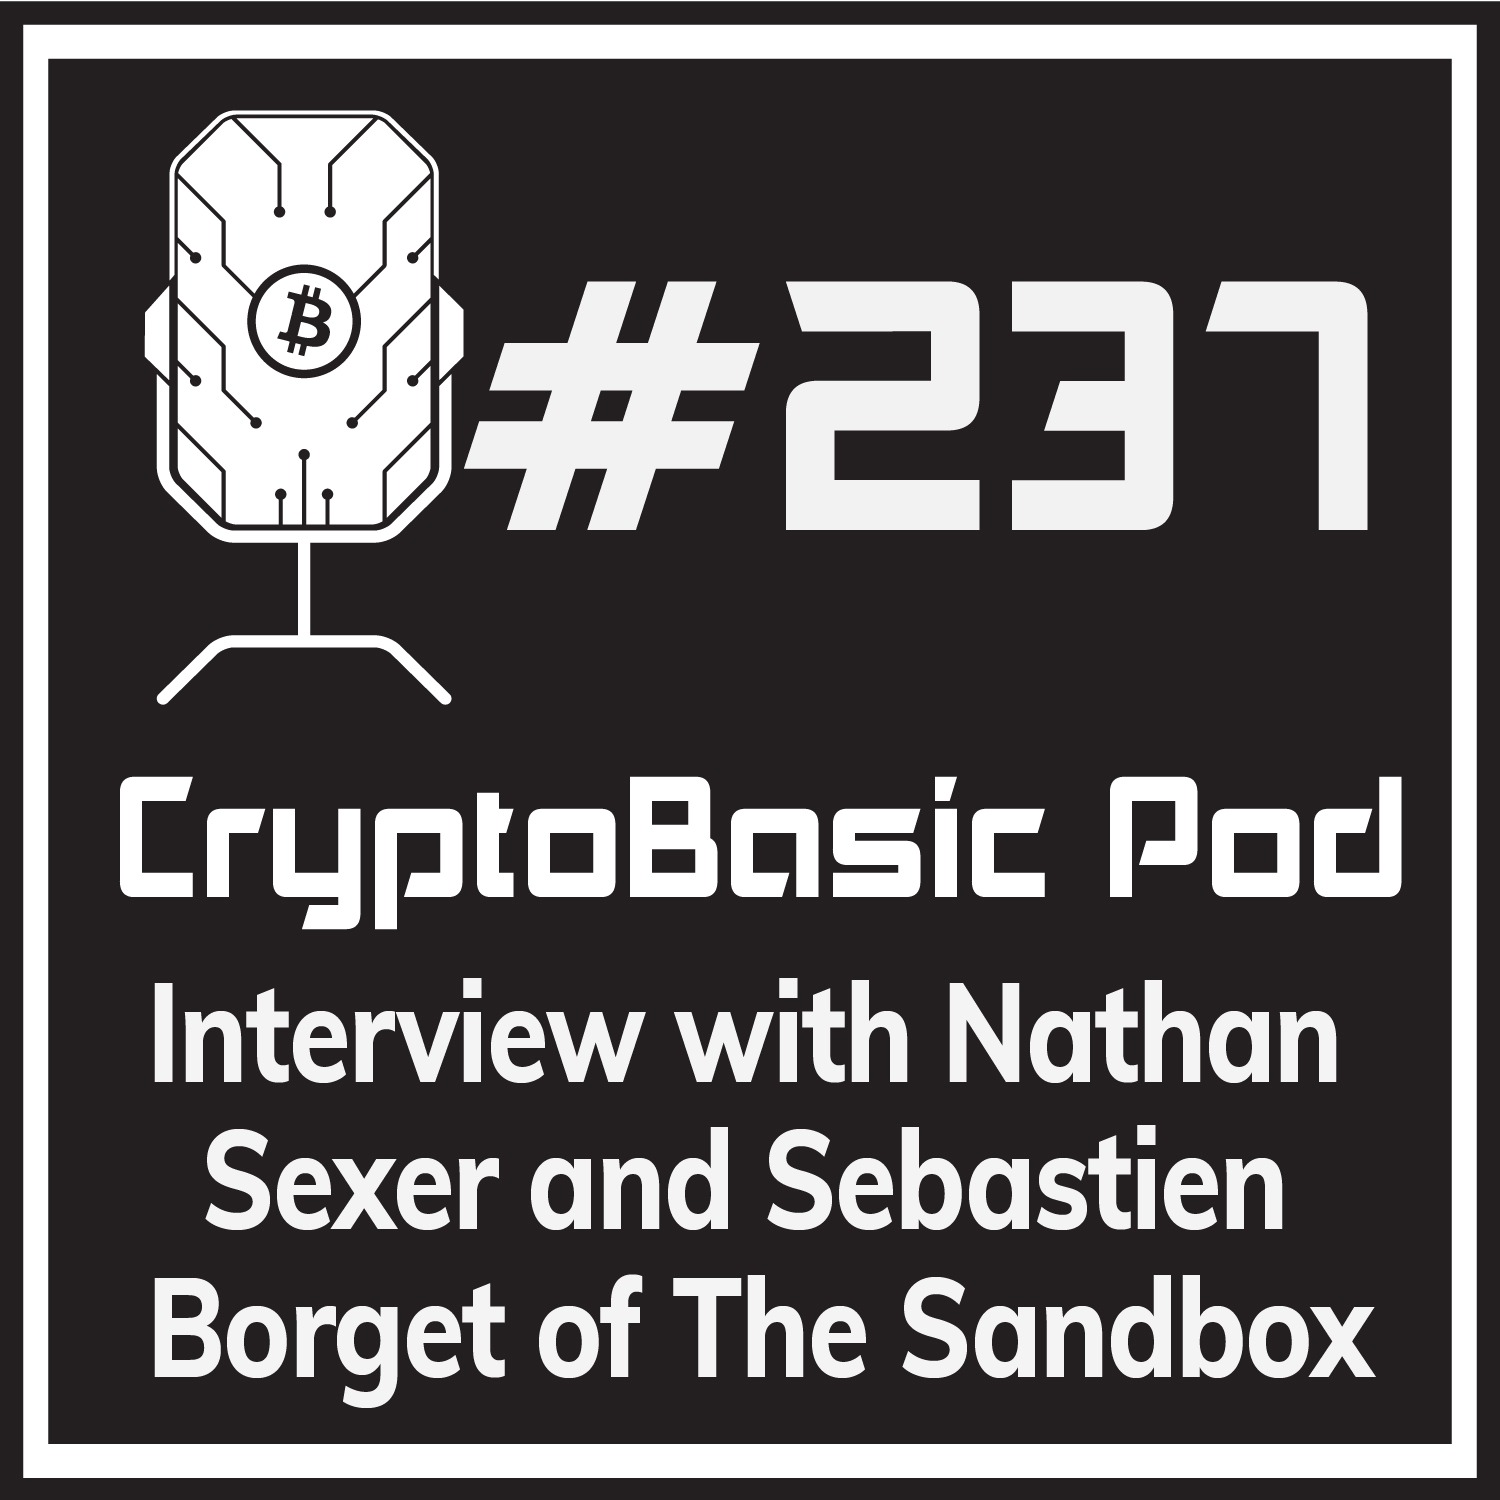 Episode 237 - Interview with Nathan Sexer and Sebastien Borget of The Sandbox